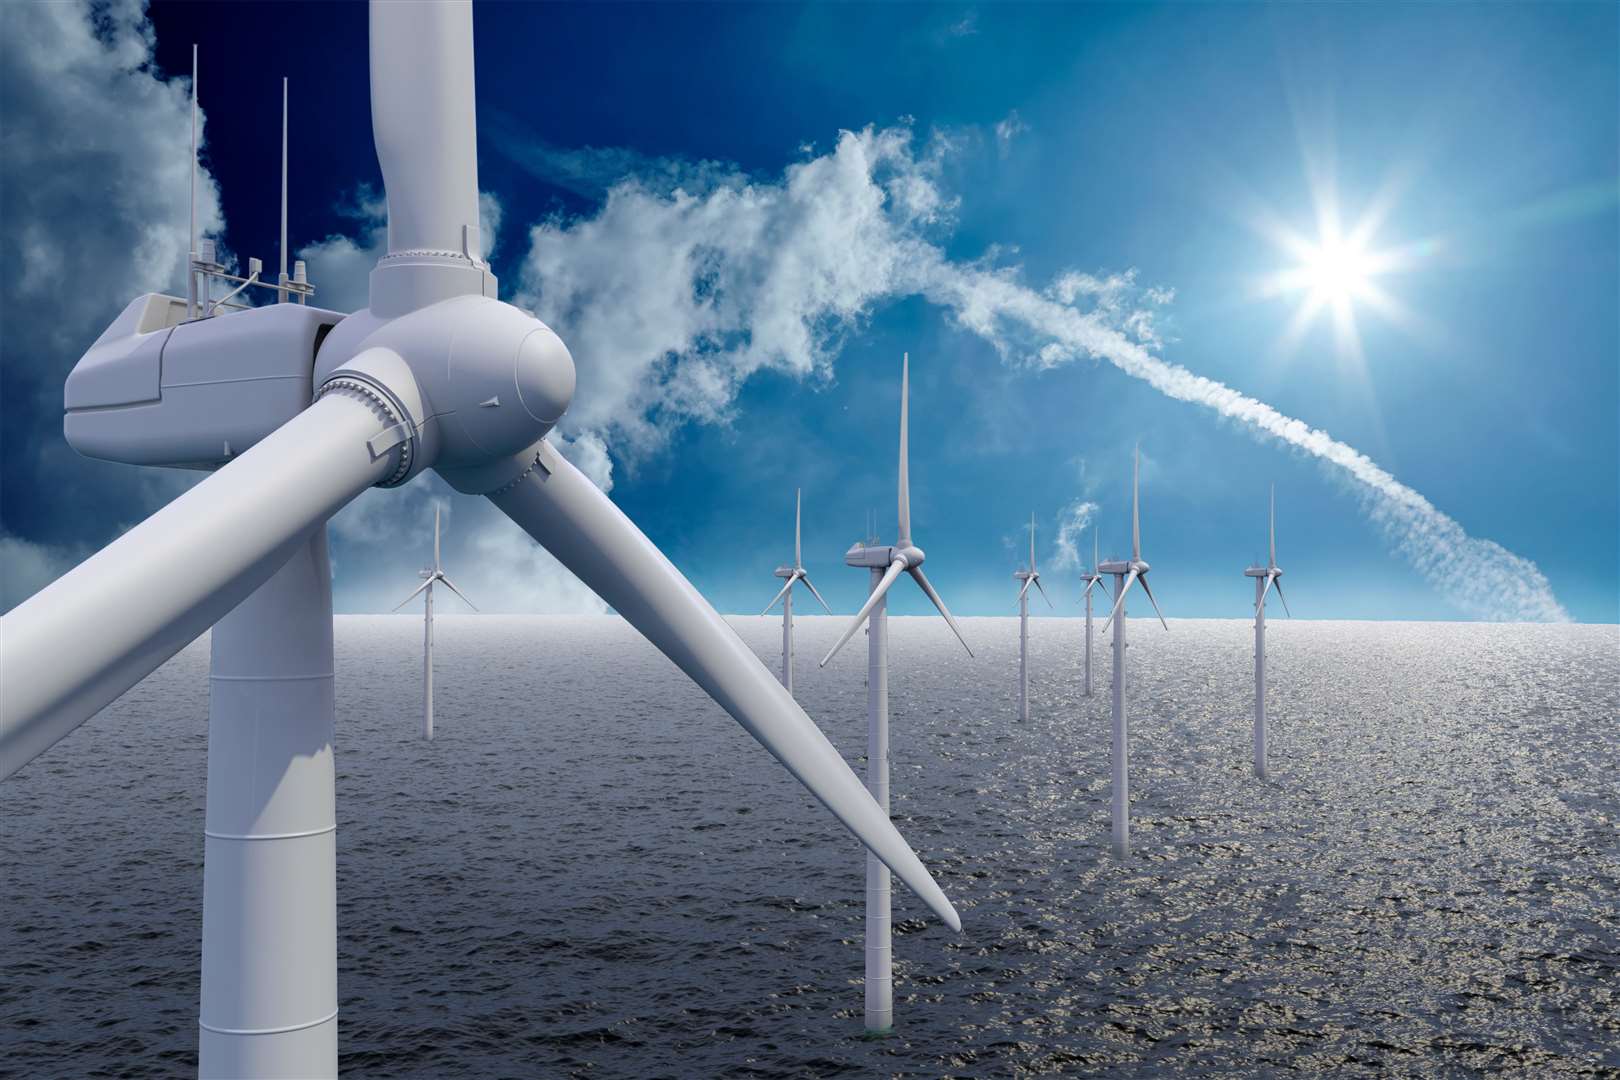 Crown Estate Scotland grants seabed property rights for new commercial offshore wind projects through ScotWind Leasing.